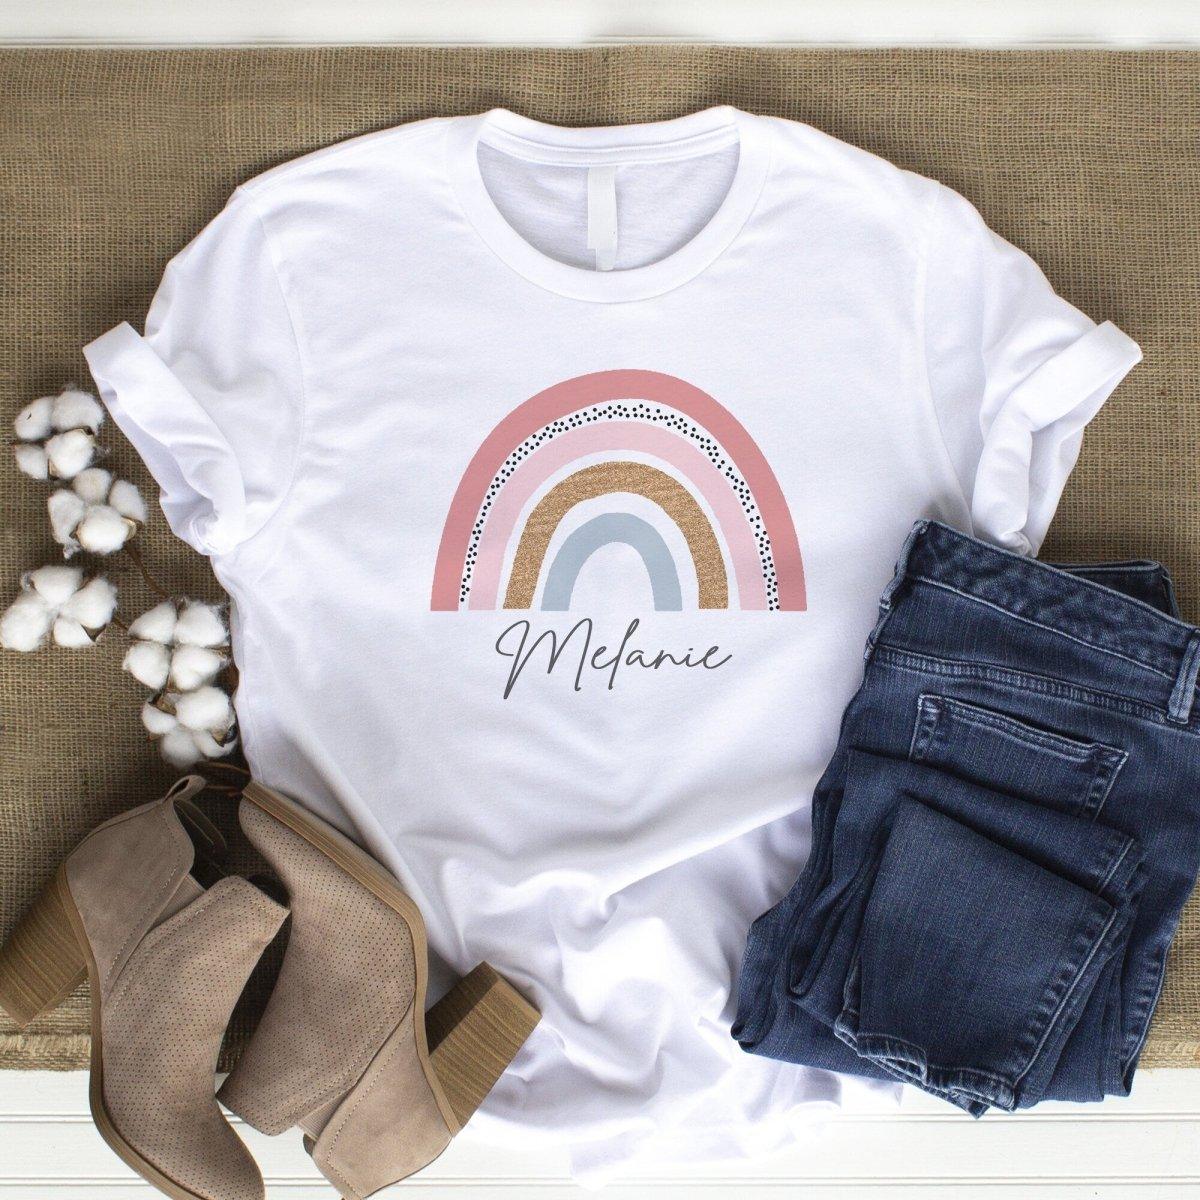 Personalised Rainbow T-shirt, Personalised Rainbow Top, Rainbow Lounge T-shirt, Lounge-wear Tops, Rainbow Clothes, Rainbow Gifts, - Amy Lucy